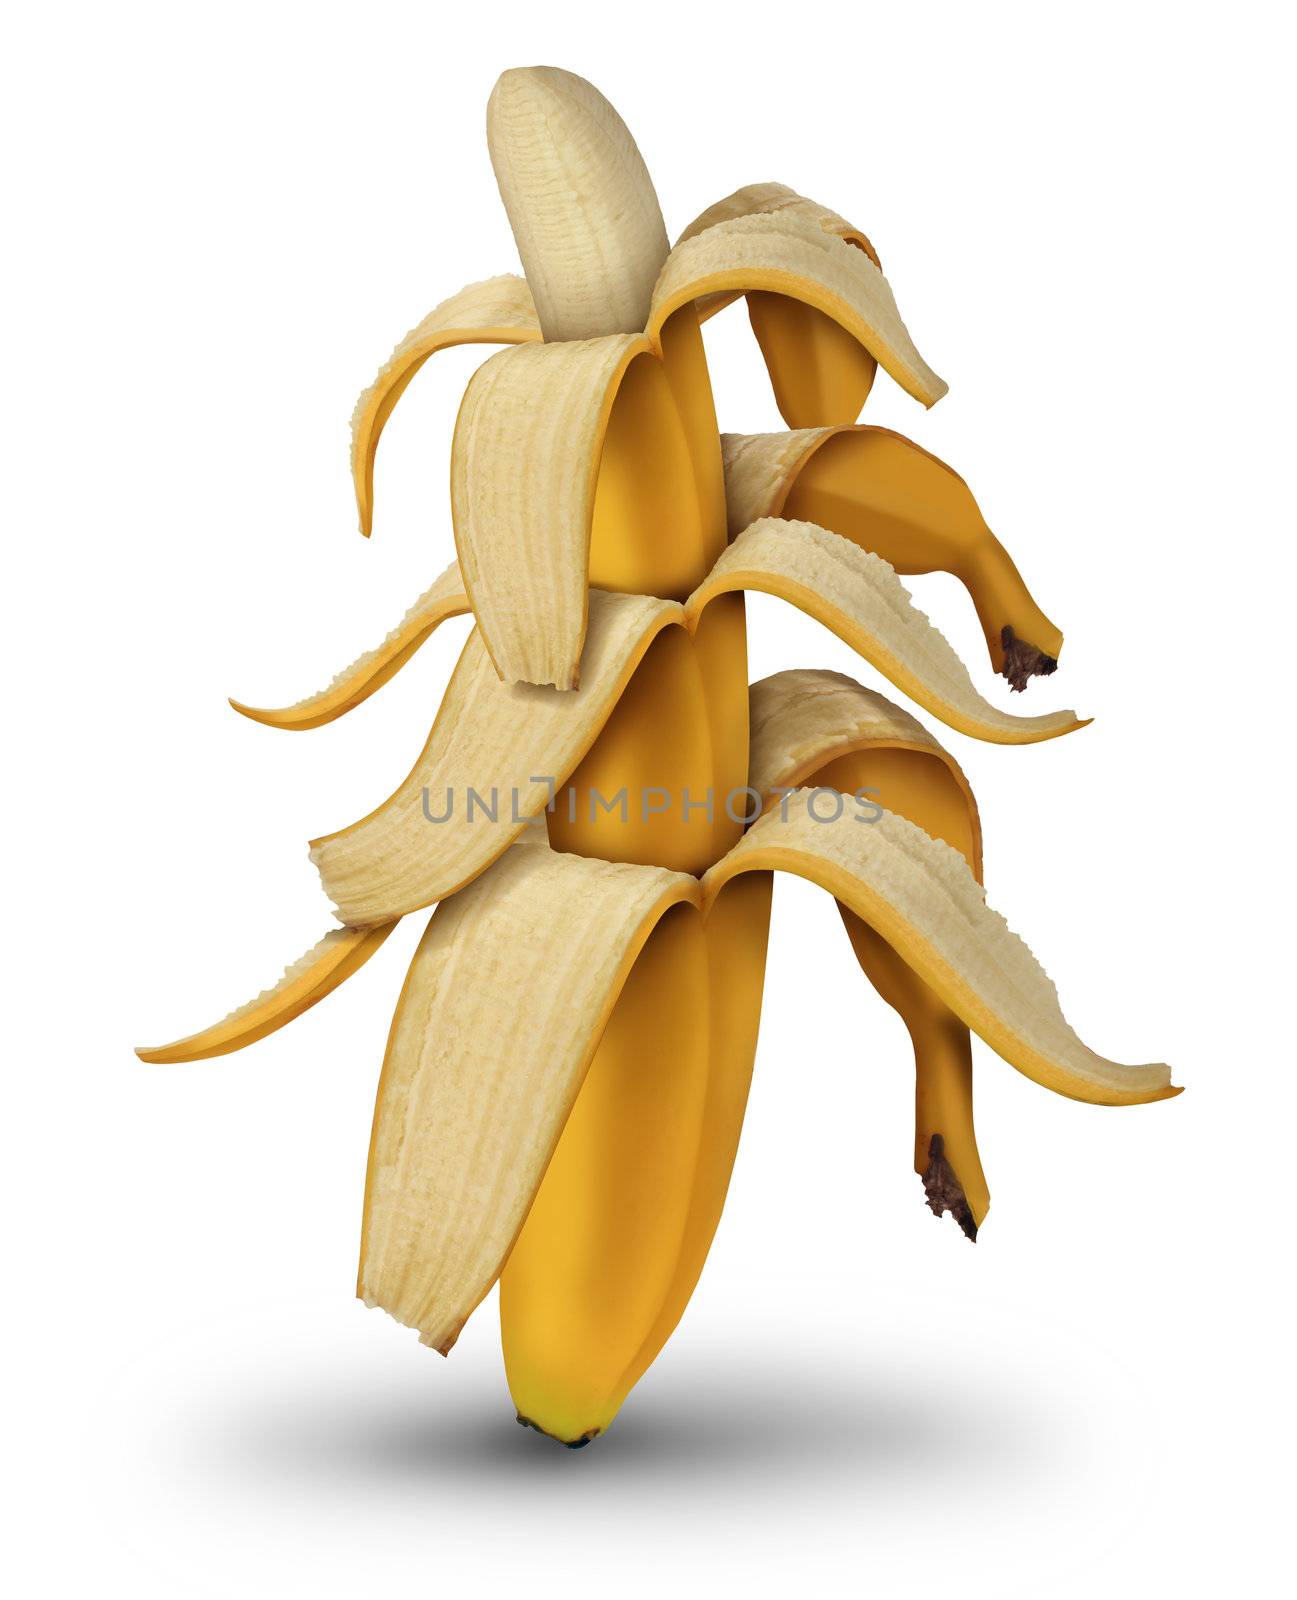 Diminishing returns and lower investment value by the decreasing in size of banana fruit with open peel as a business concept of financial lower profits on a white background.